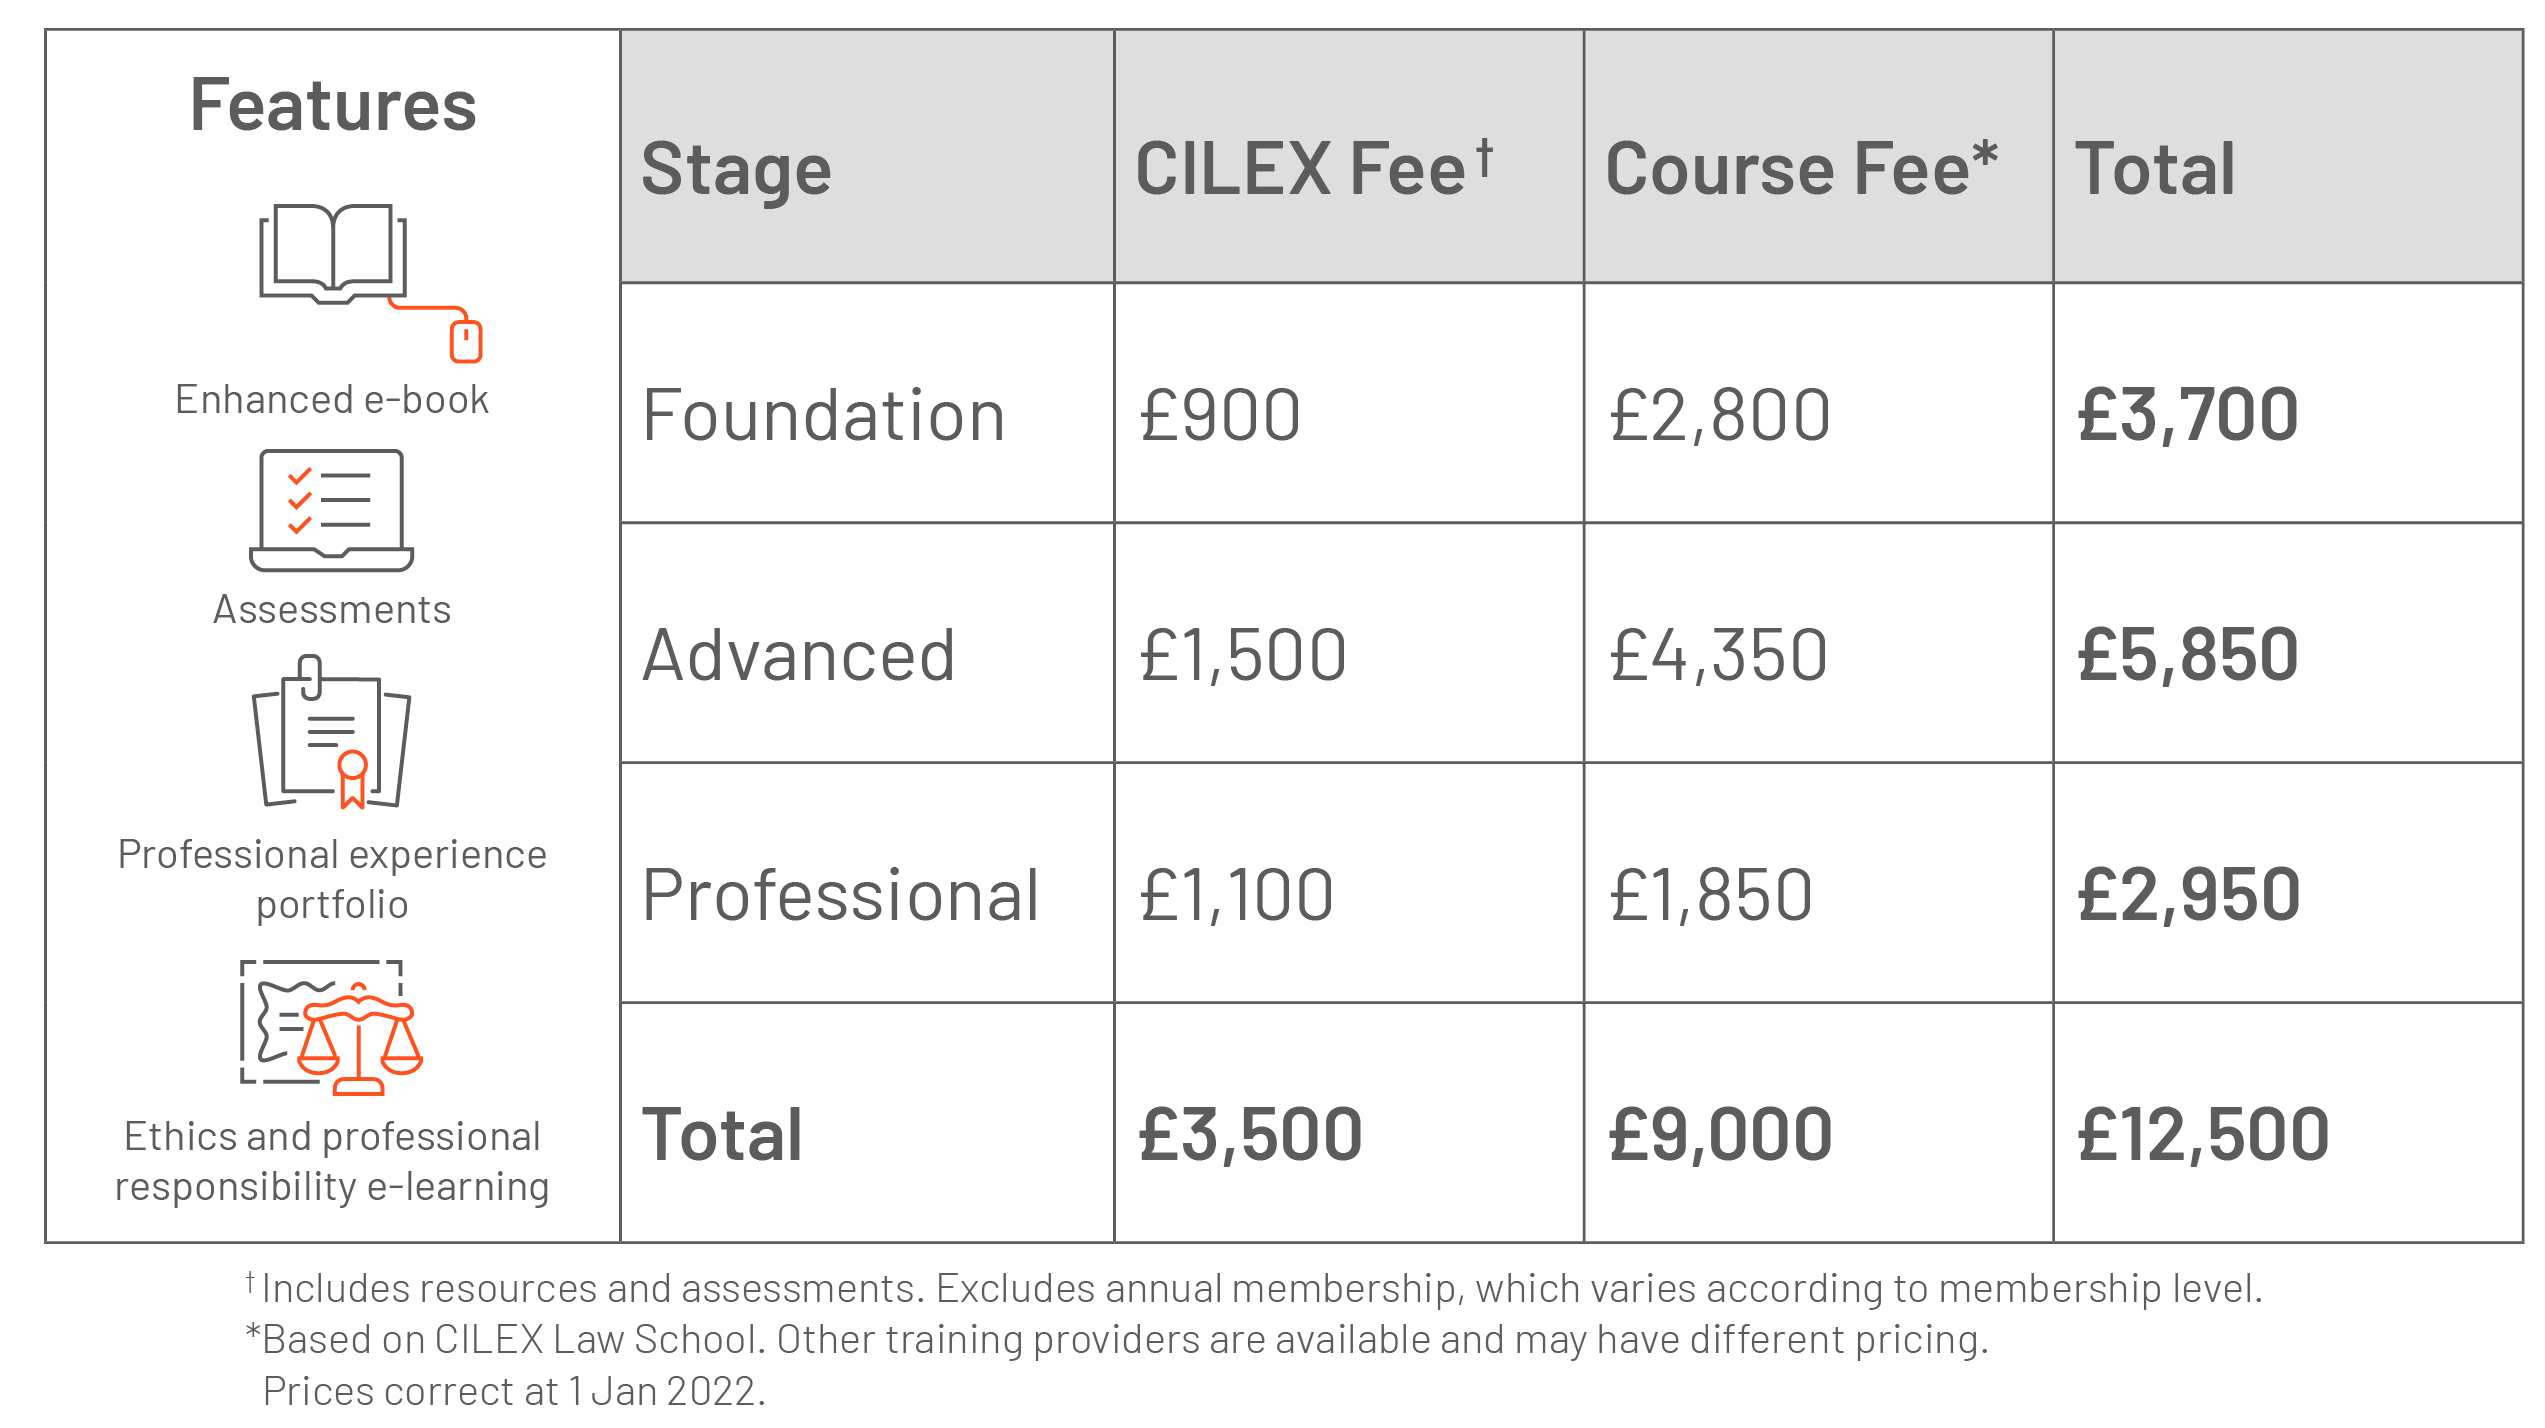 CPQ Prices: CPQ Foundation = £3,700. CPQ Advanced = £5,850. CPQ Professional = £2,950. Total = £12,500. Price for each stage includes CILEX Fee for resources and assessments, and Course Fee based on CILEX Law School. Other training providers are available and may have different pricing. Excludes annual membership which varies according to member level. Prices correct at 1 Jan 2020. 